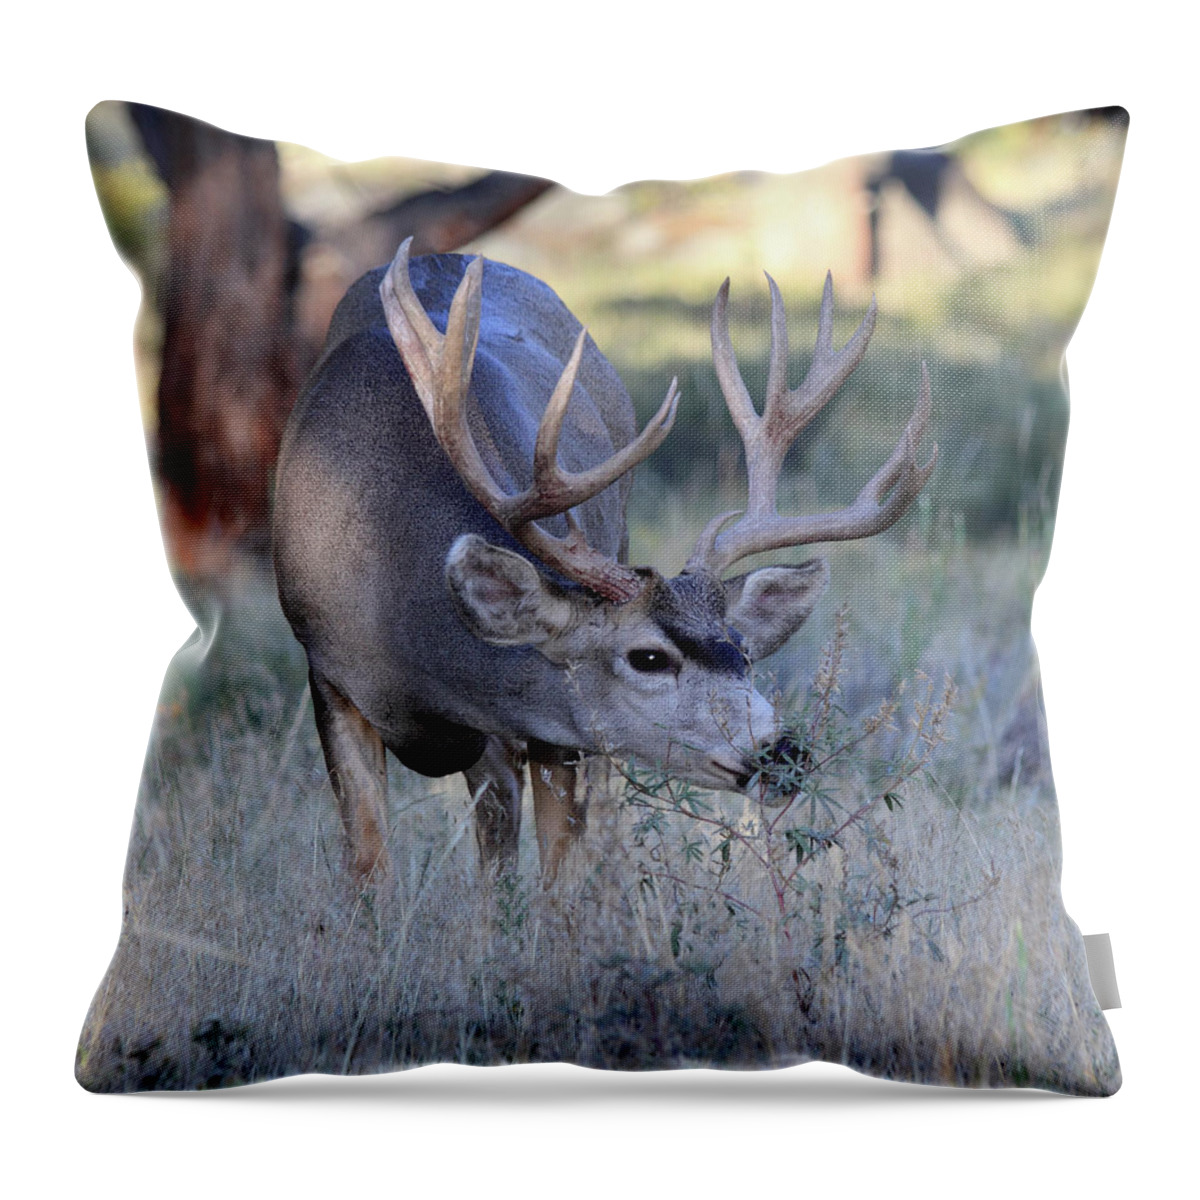 Mule Deer Throw Pillow featuring the photograph Dinner Time by Shane Bechler